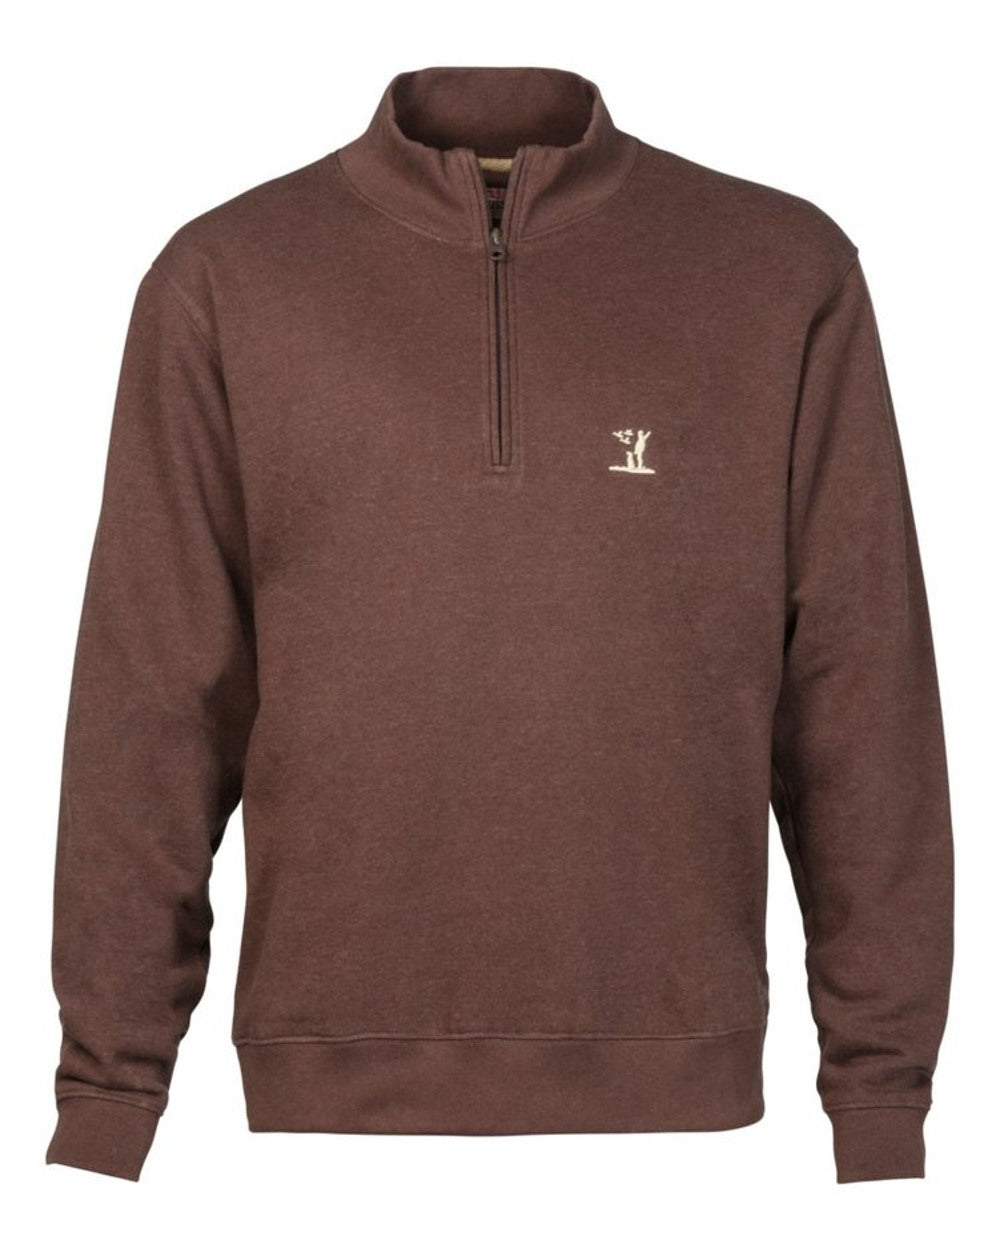 Percussion High Neck Sweatshirt in Brown 